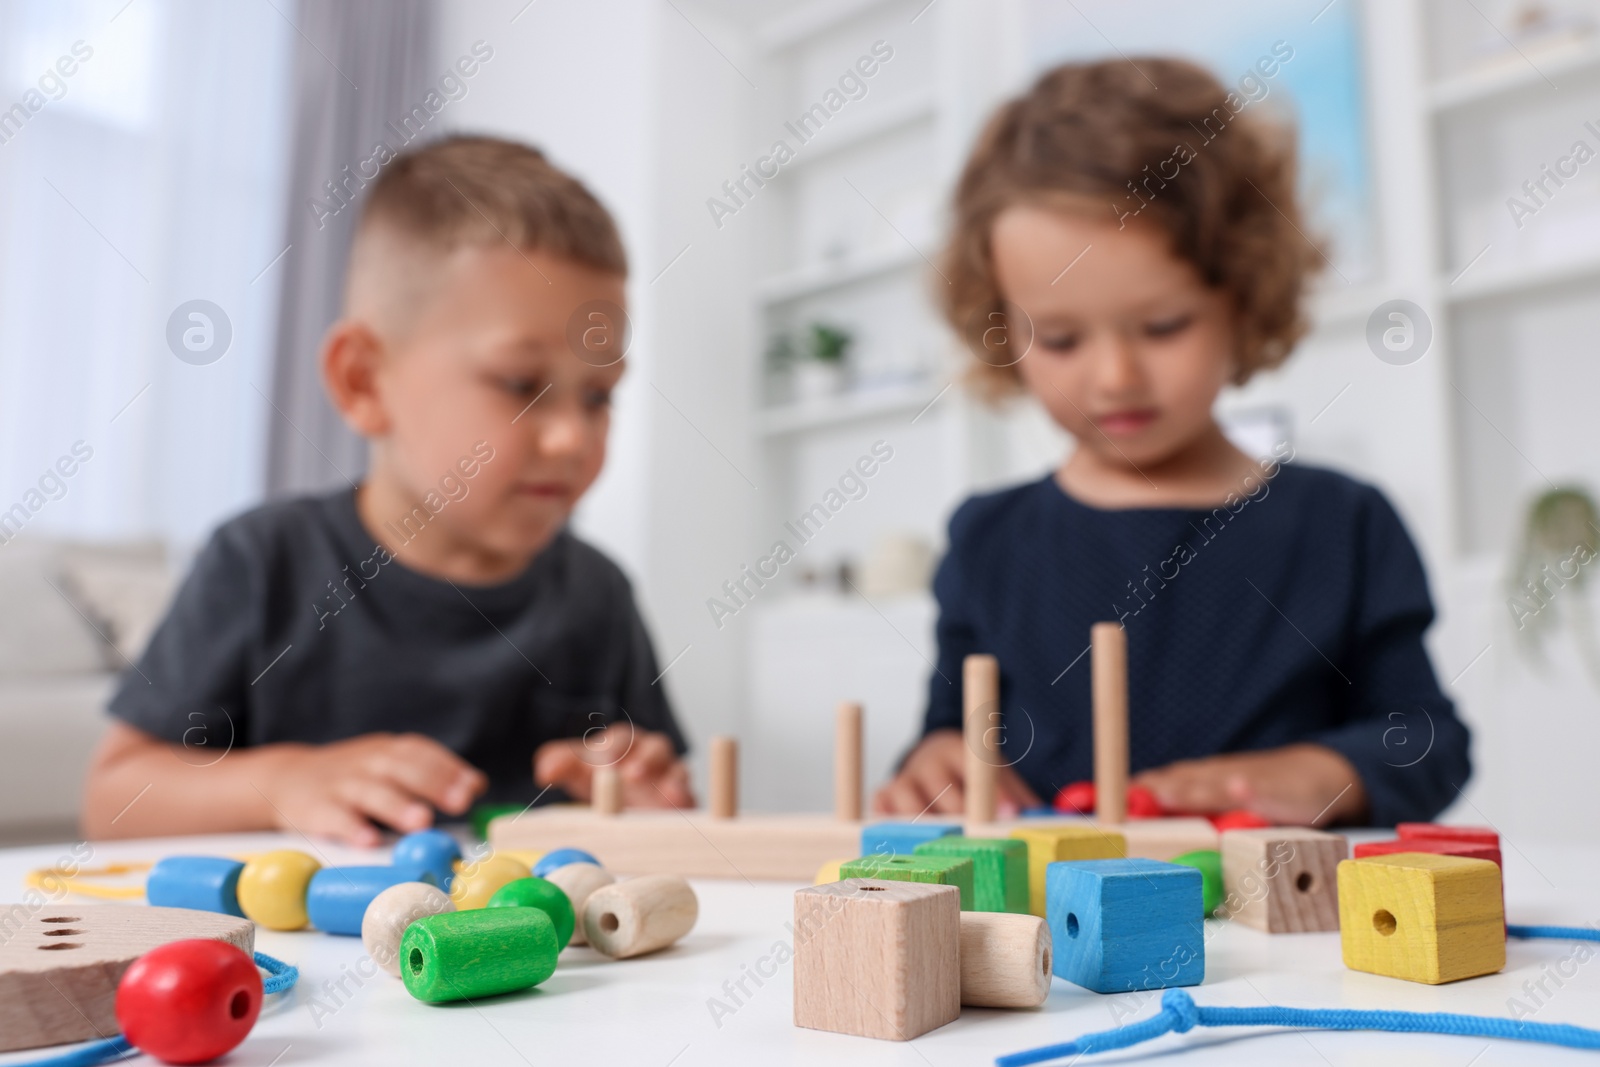 Photo of Motor skills development. Little kids playing with stacking and counting game at table indoors, selective focus. Space for text